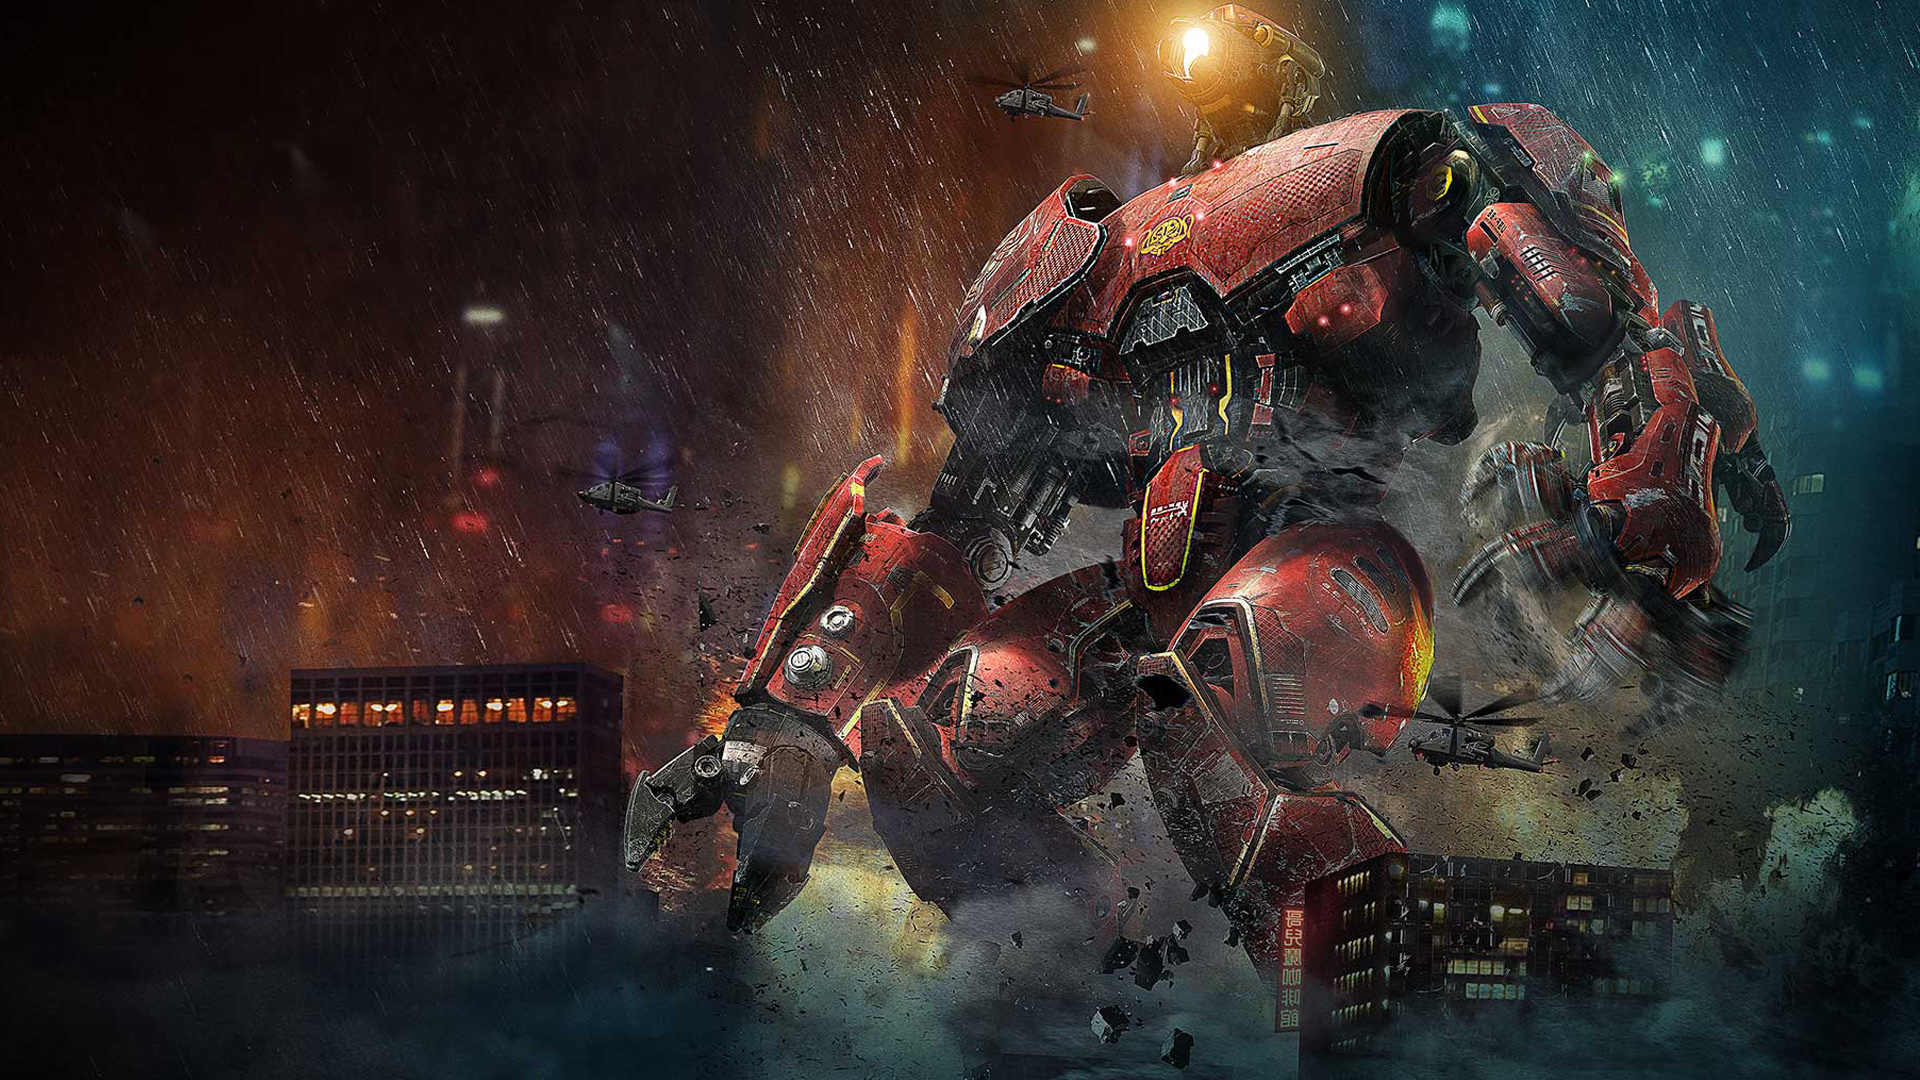 pacific rim movie wallpapers